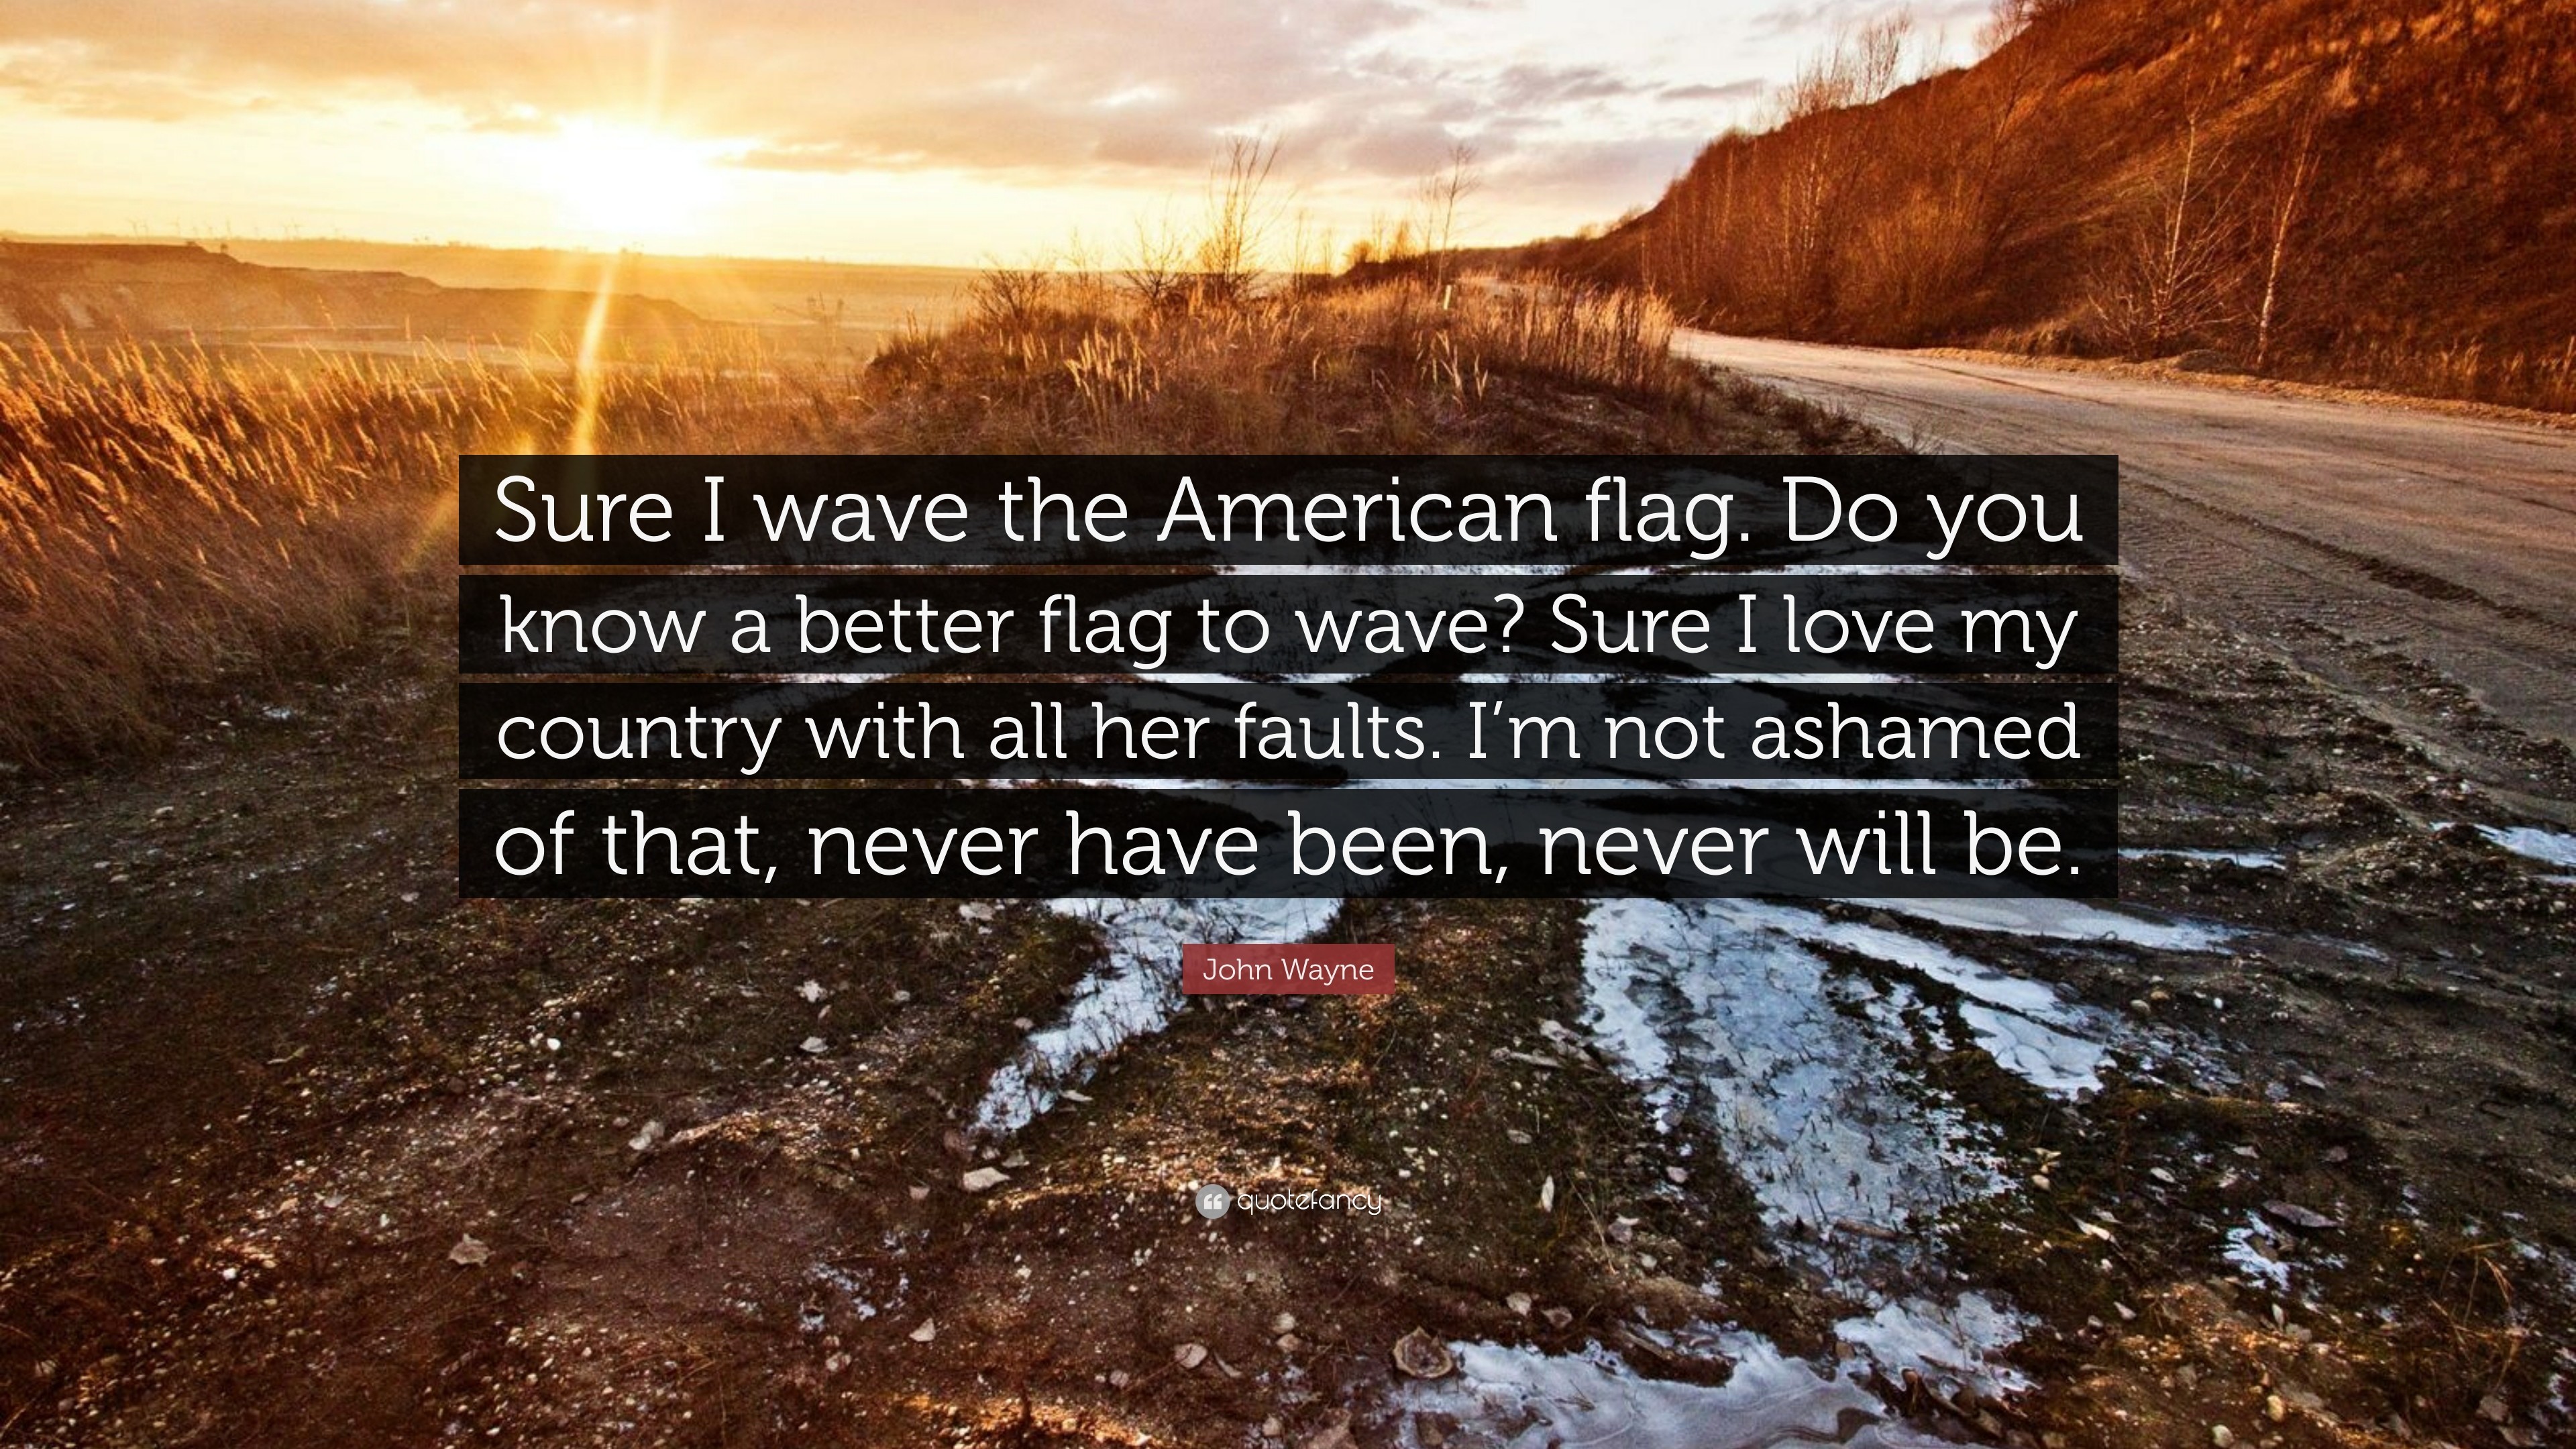 3840x2160 John Wayne Quote: “Sure I wave the American flag. Do you know a